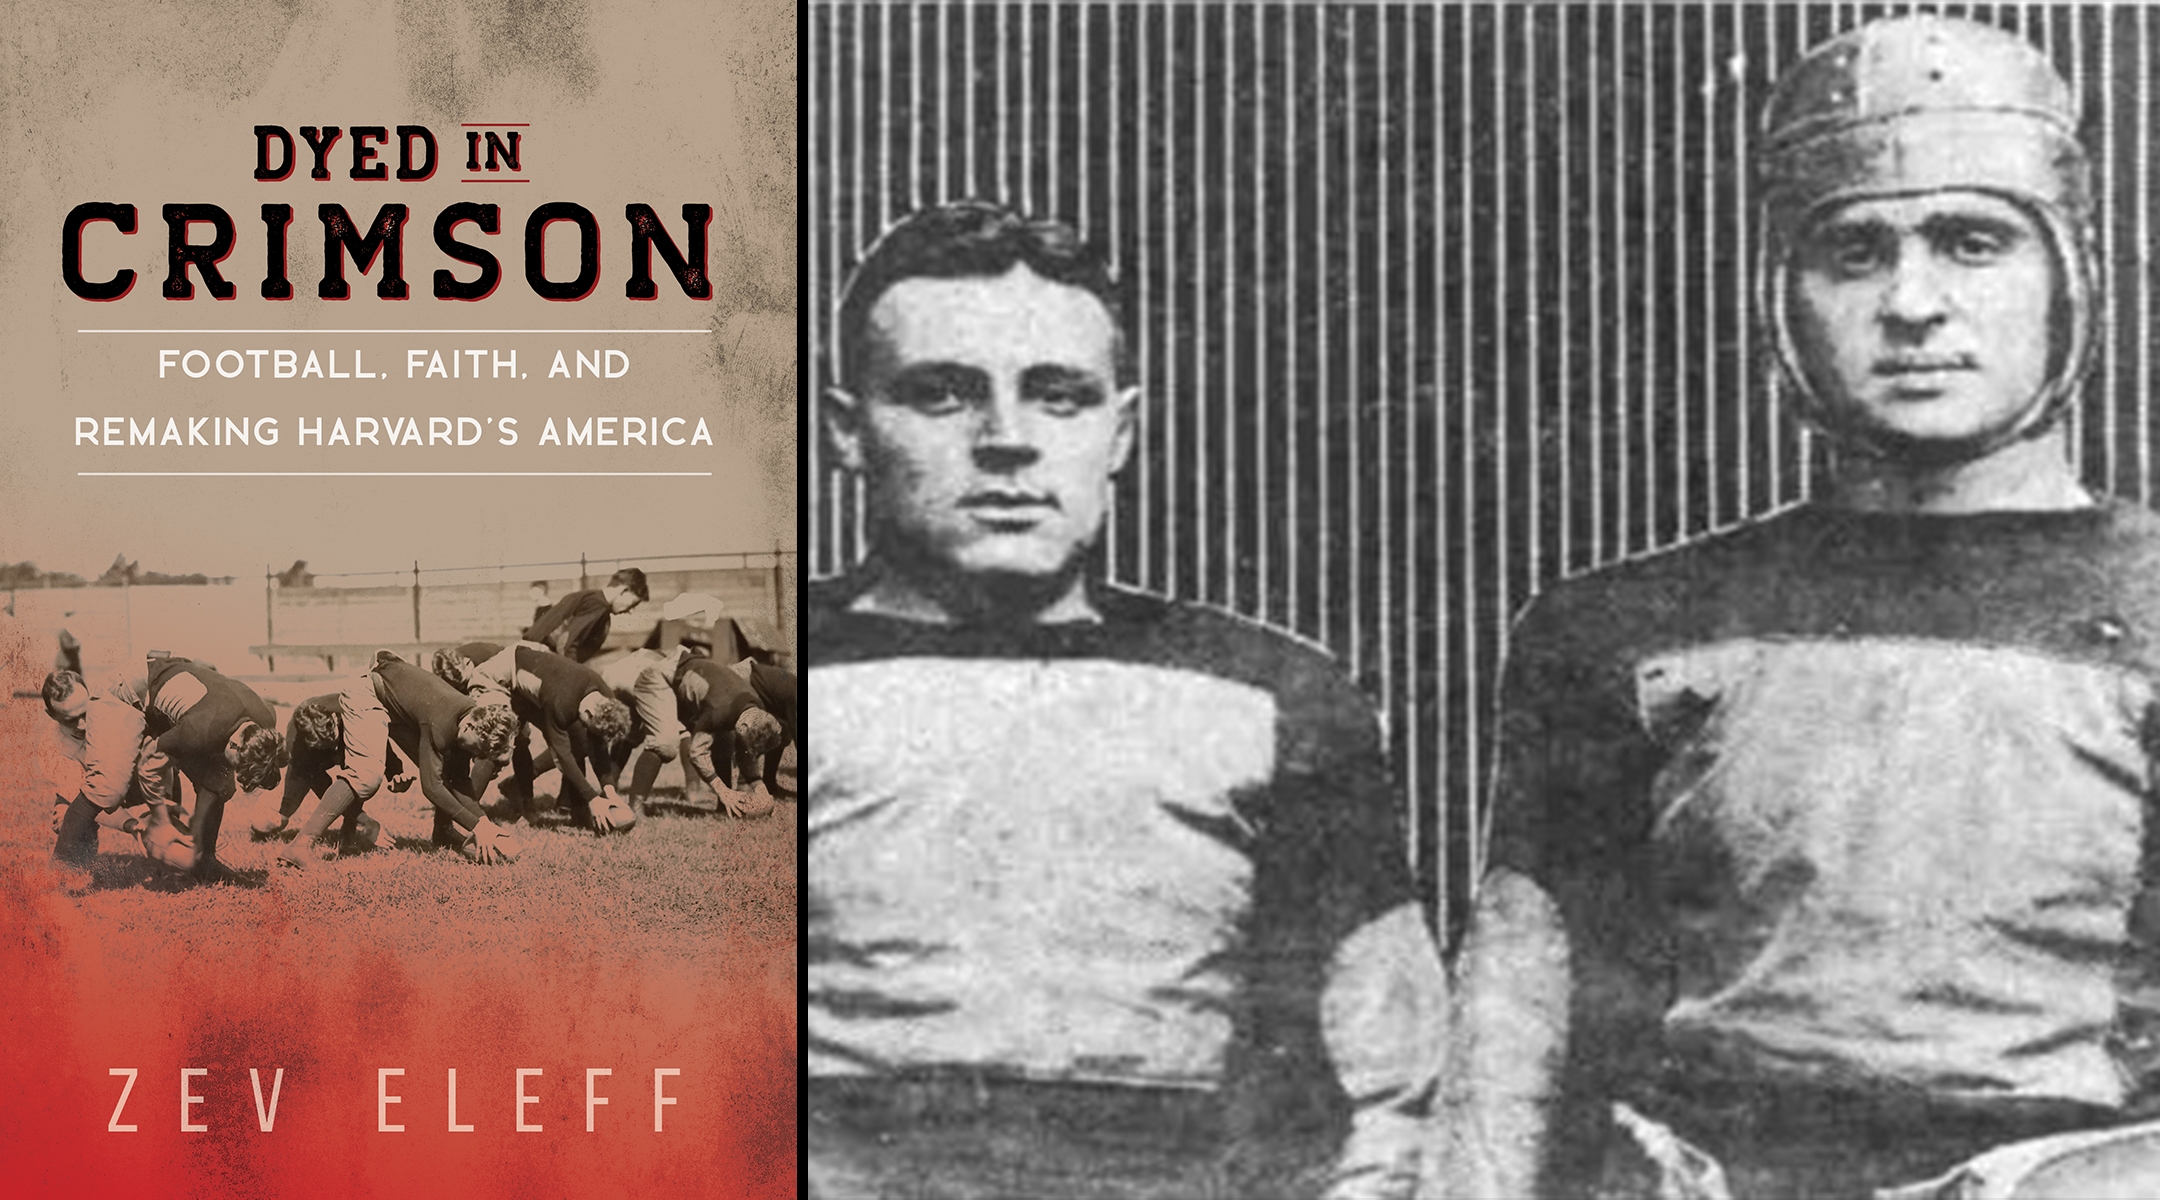 The new book “Dyed in Crimson” shares the story of Harvard football captain and coach Arnold Horween, right, shown here with his brother Ralph. (Book cover courtesy of Zev Eleff, Horween photo via Wikimedia Commons)